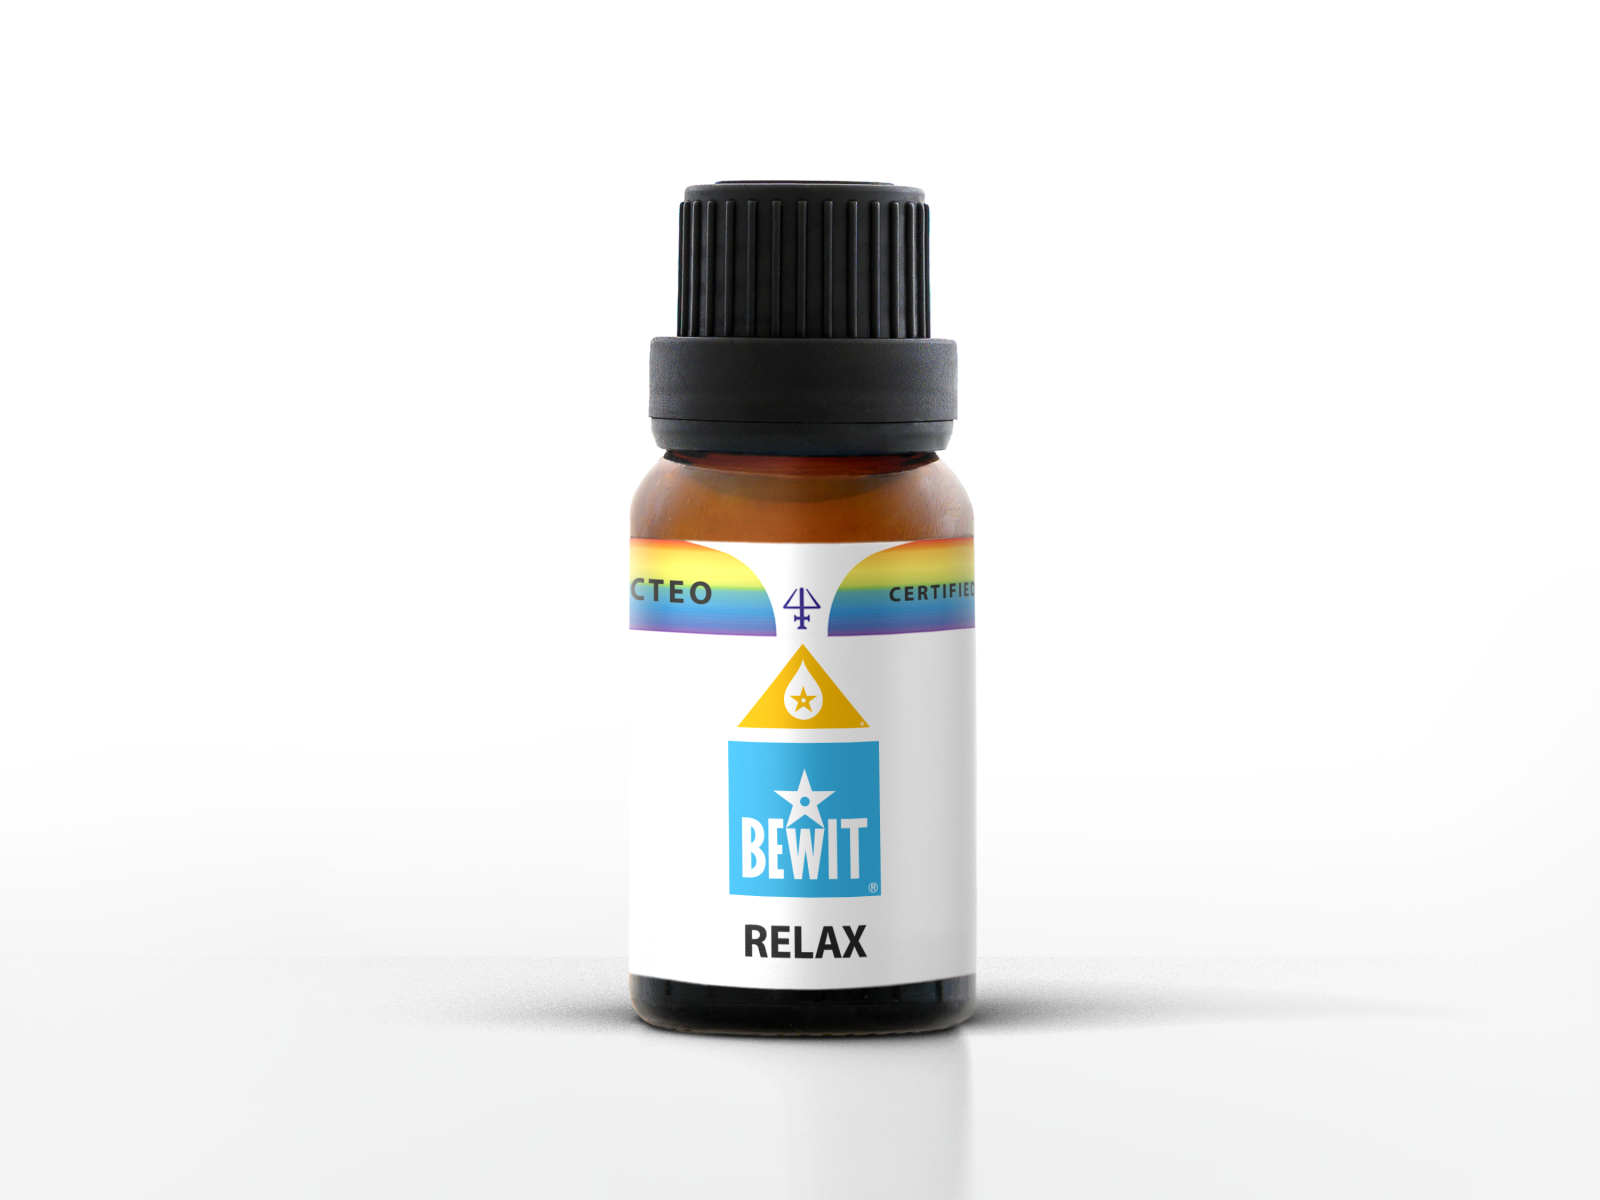 BEWIT RELAX - Blend of essential oils - 1